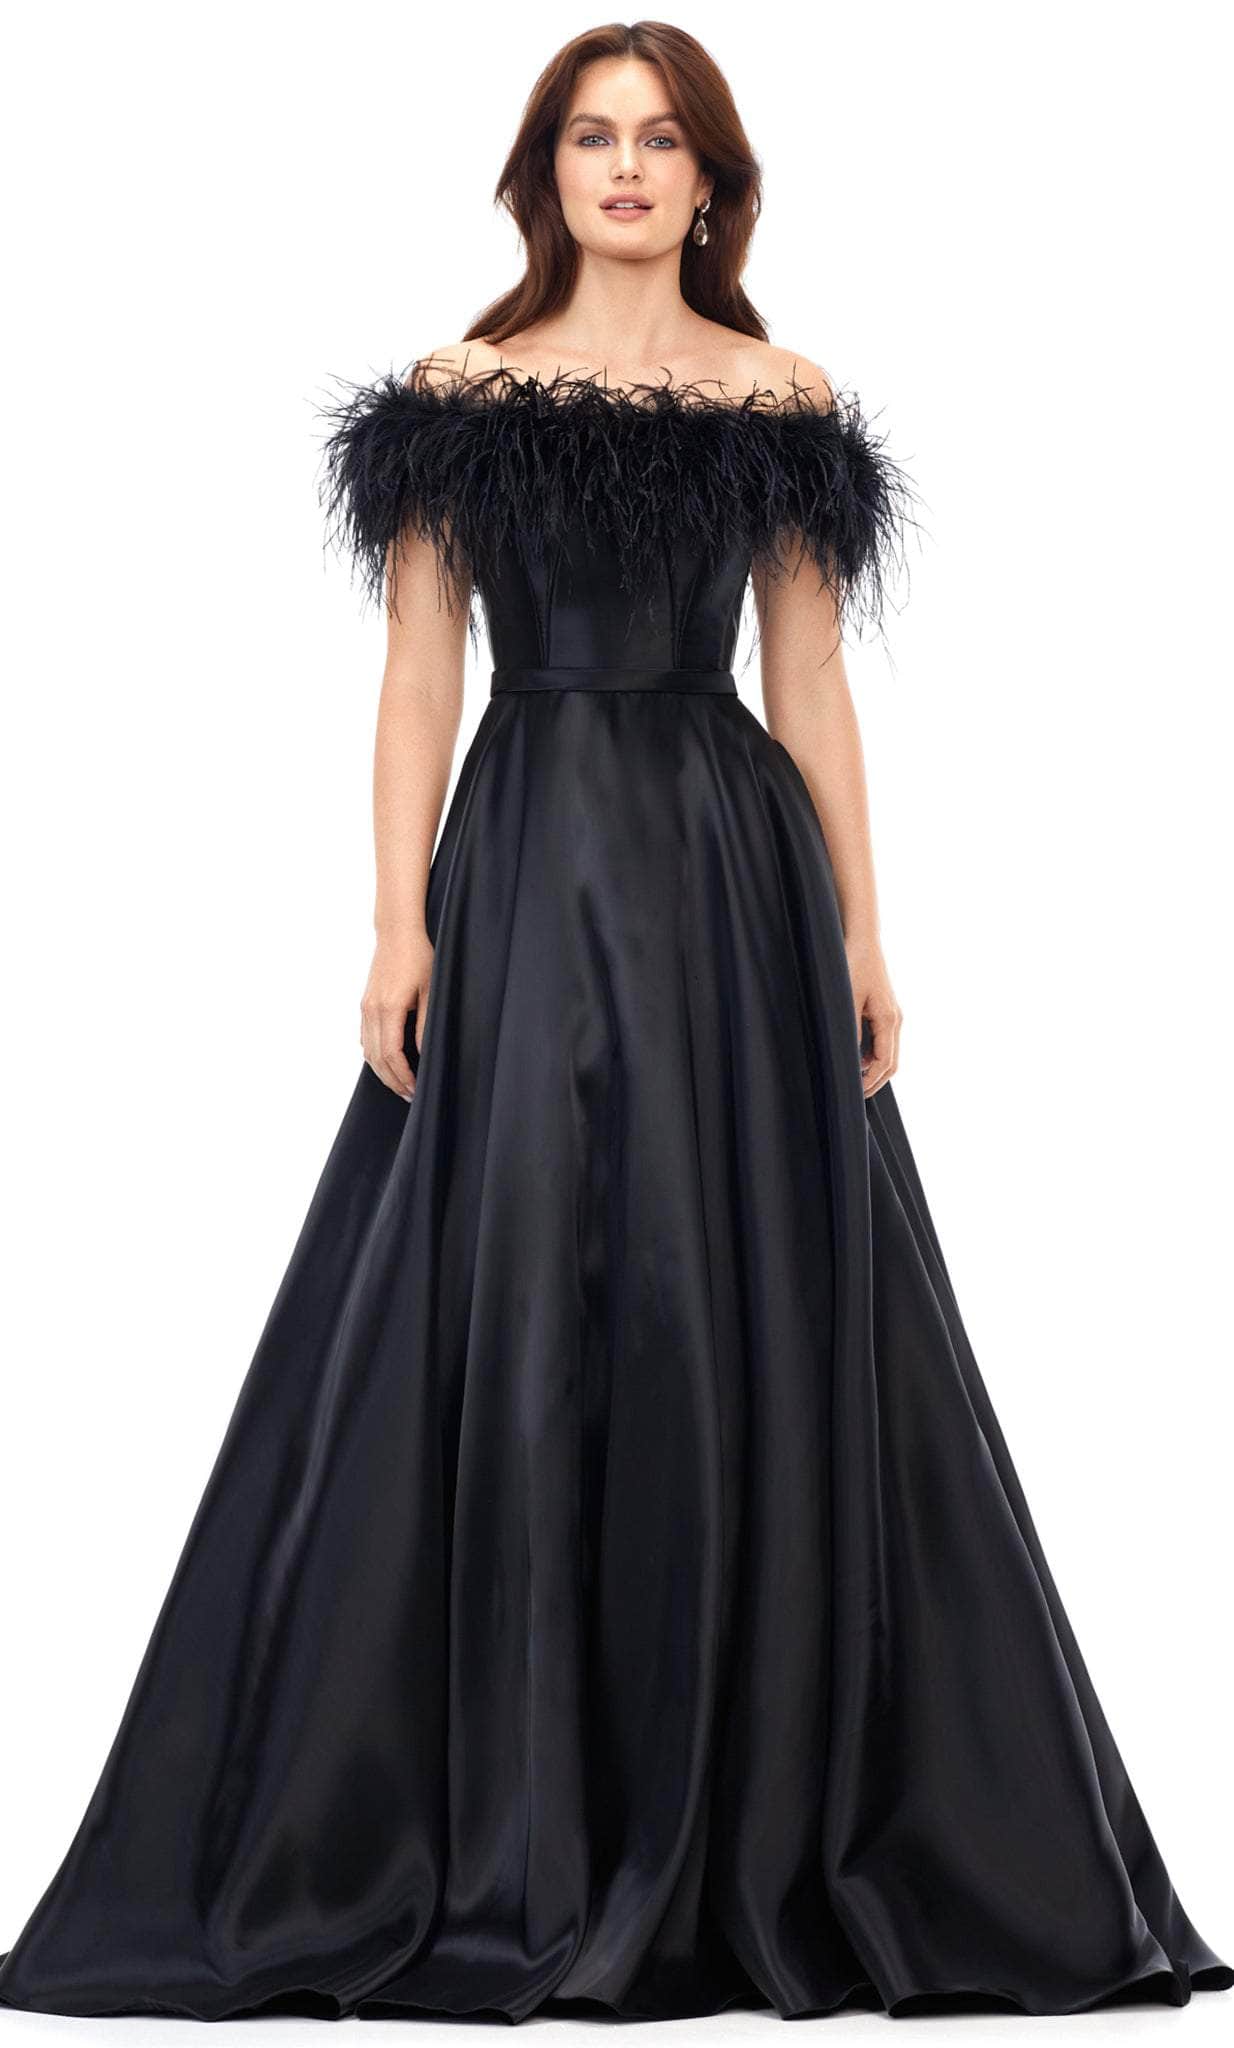 Image of Ashley Lauren 11382 - Feathered Off-Shoulder Ballgown